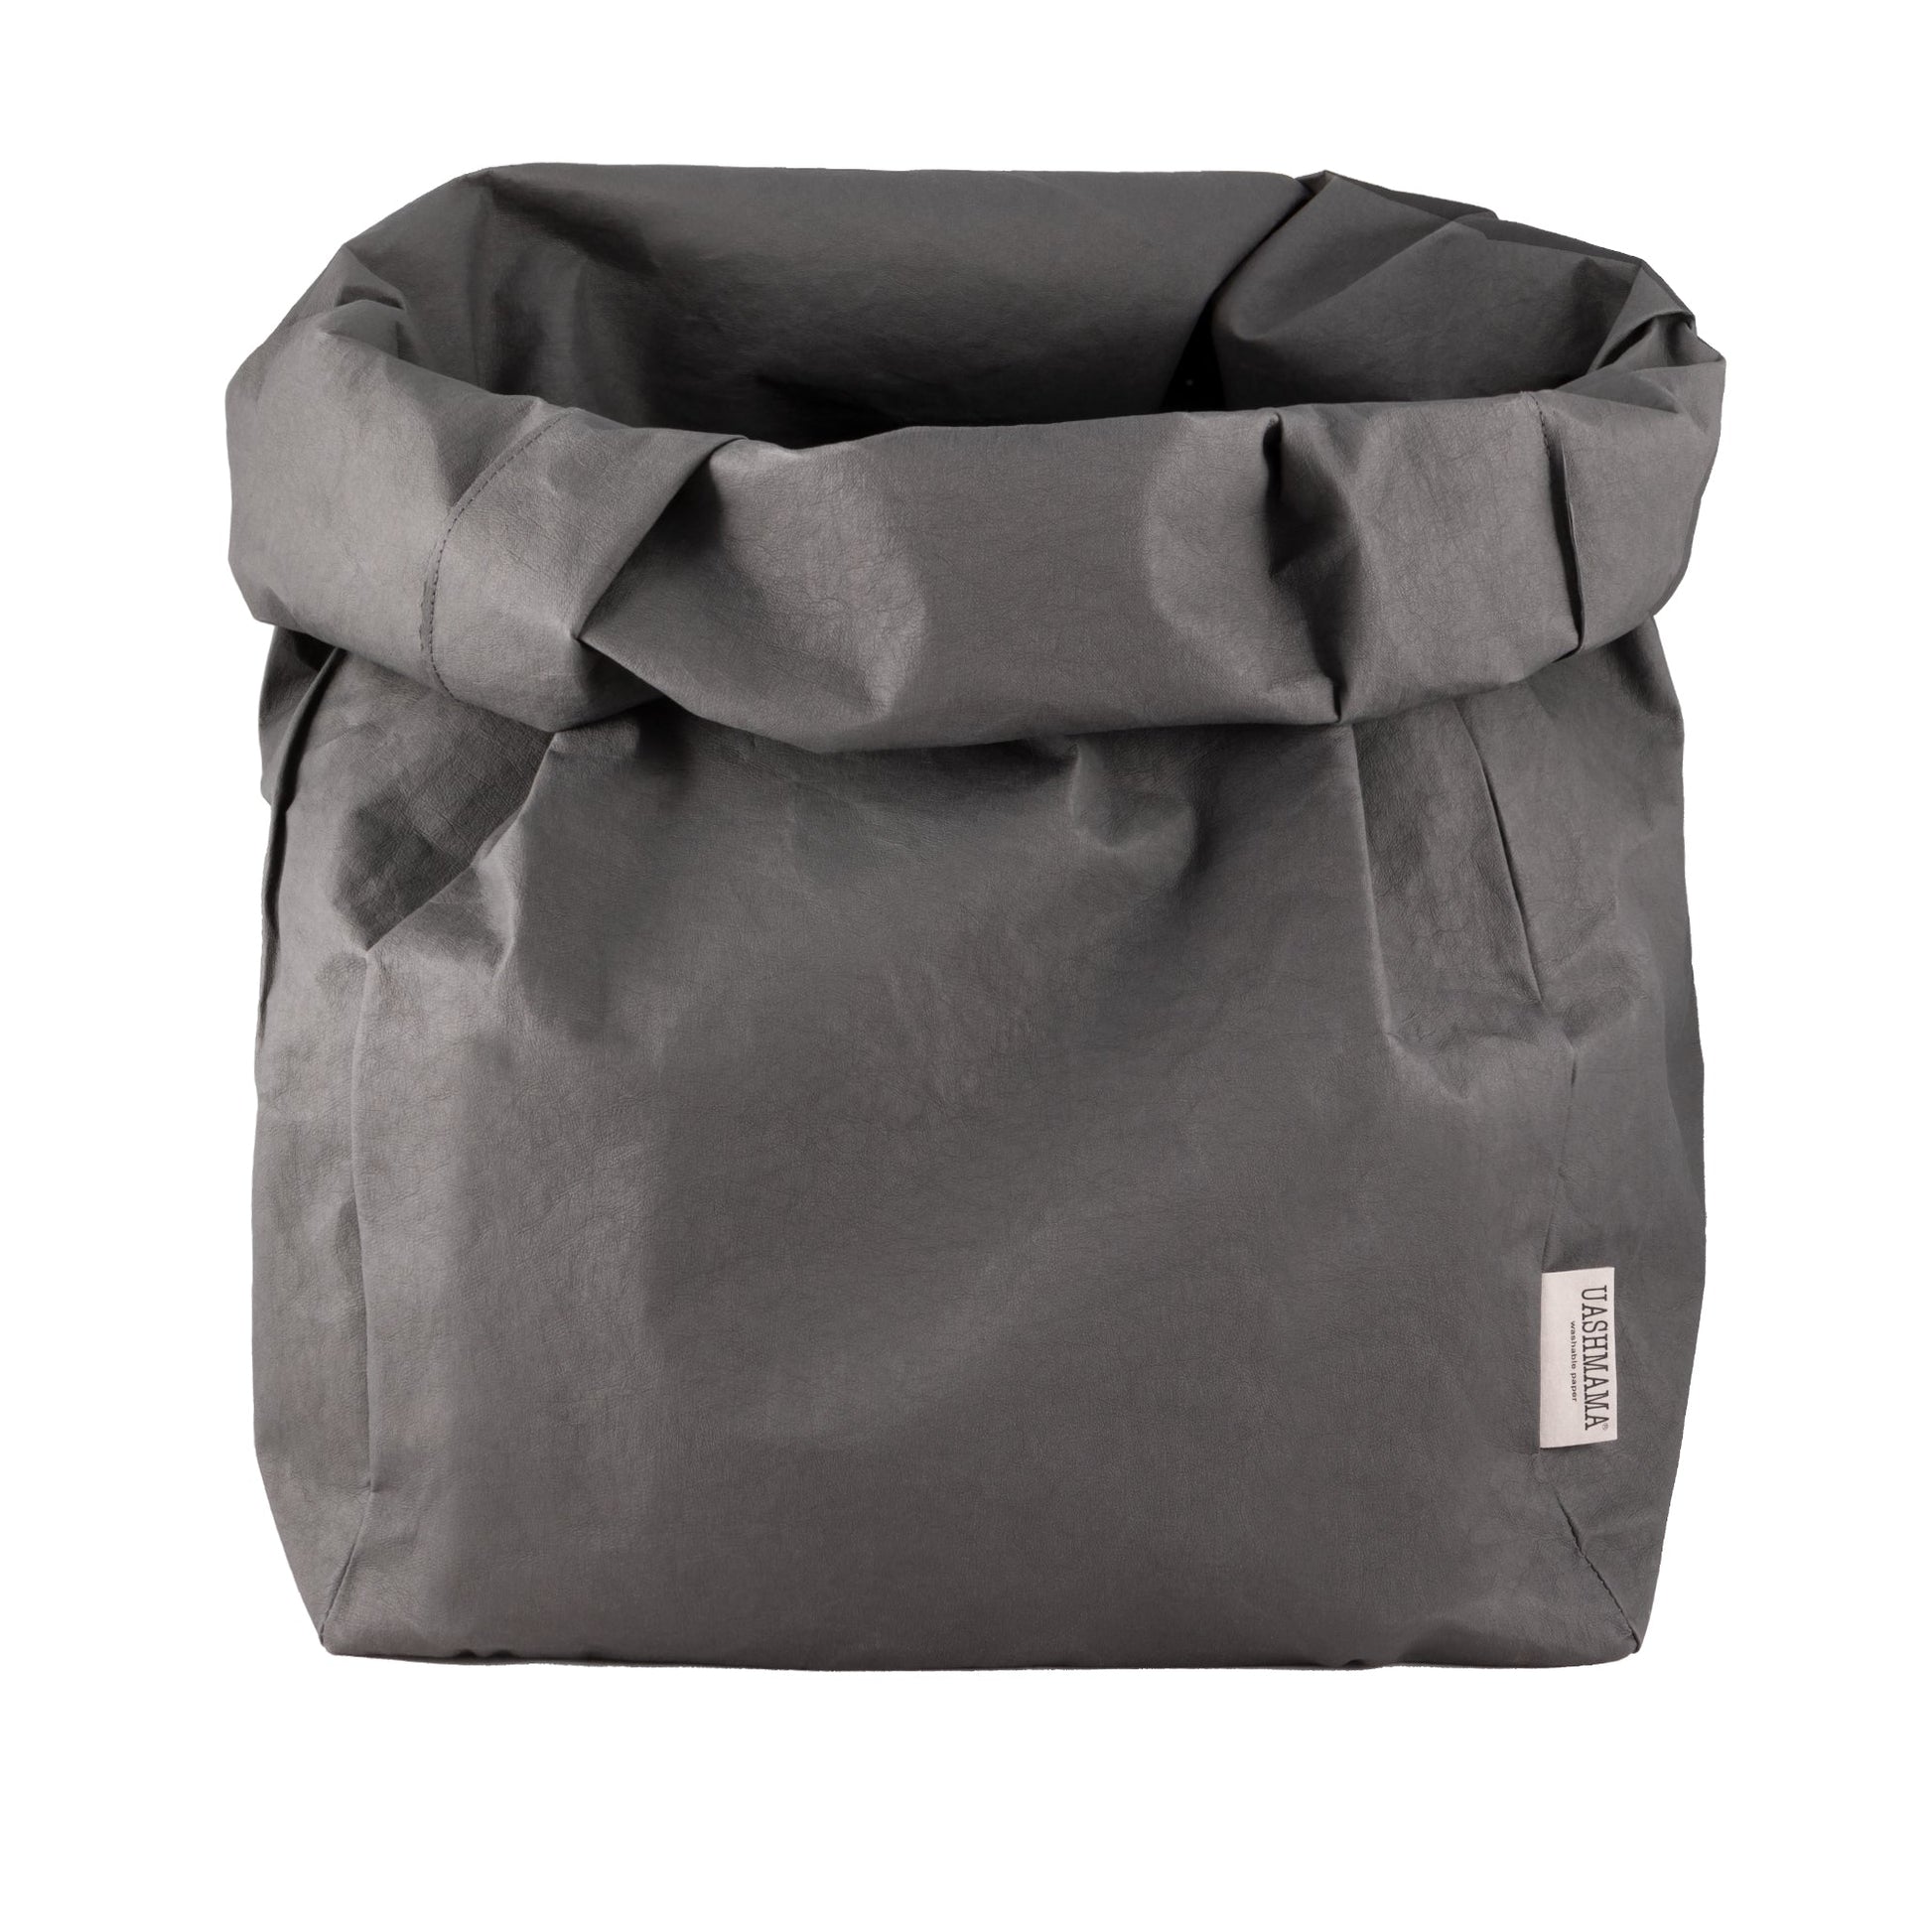 A washable paper bag is shown. The bag is rolled down at the top and features a UASHMAMA logo label on the bottom left corner. The bag pictured is the gigantic size in dark grey.